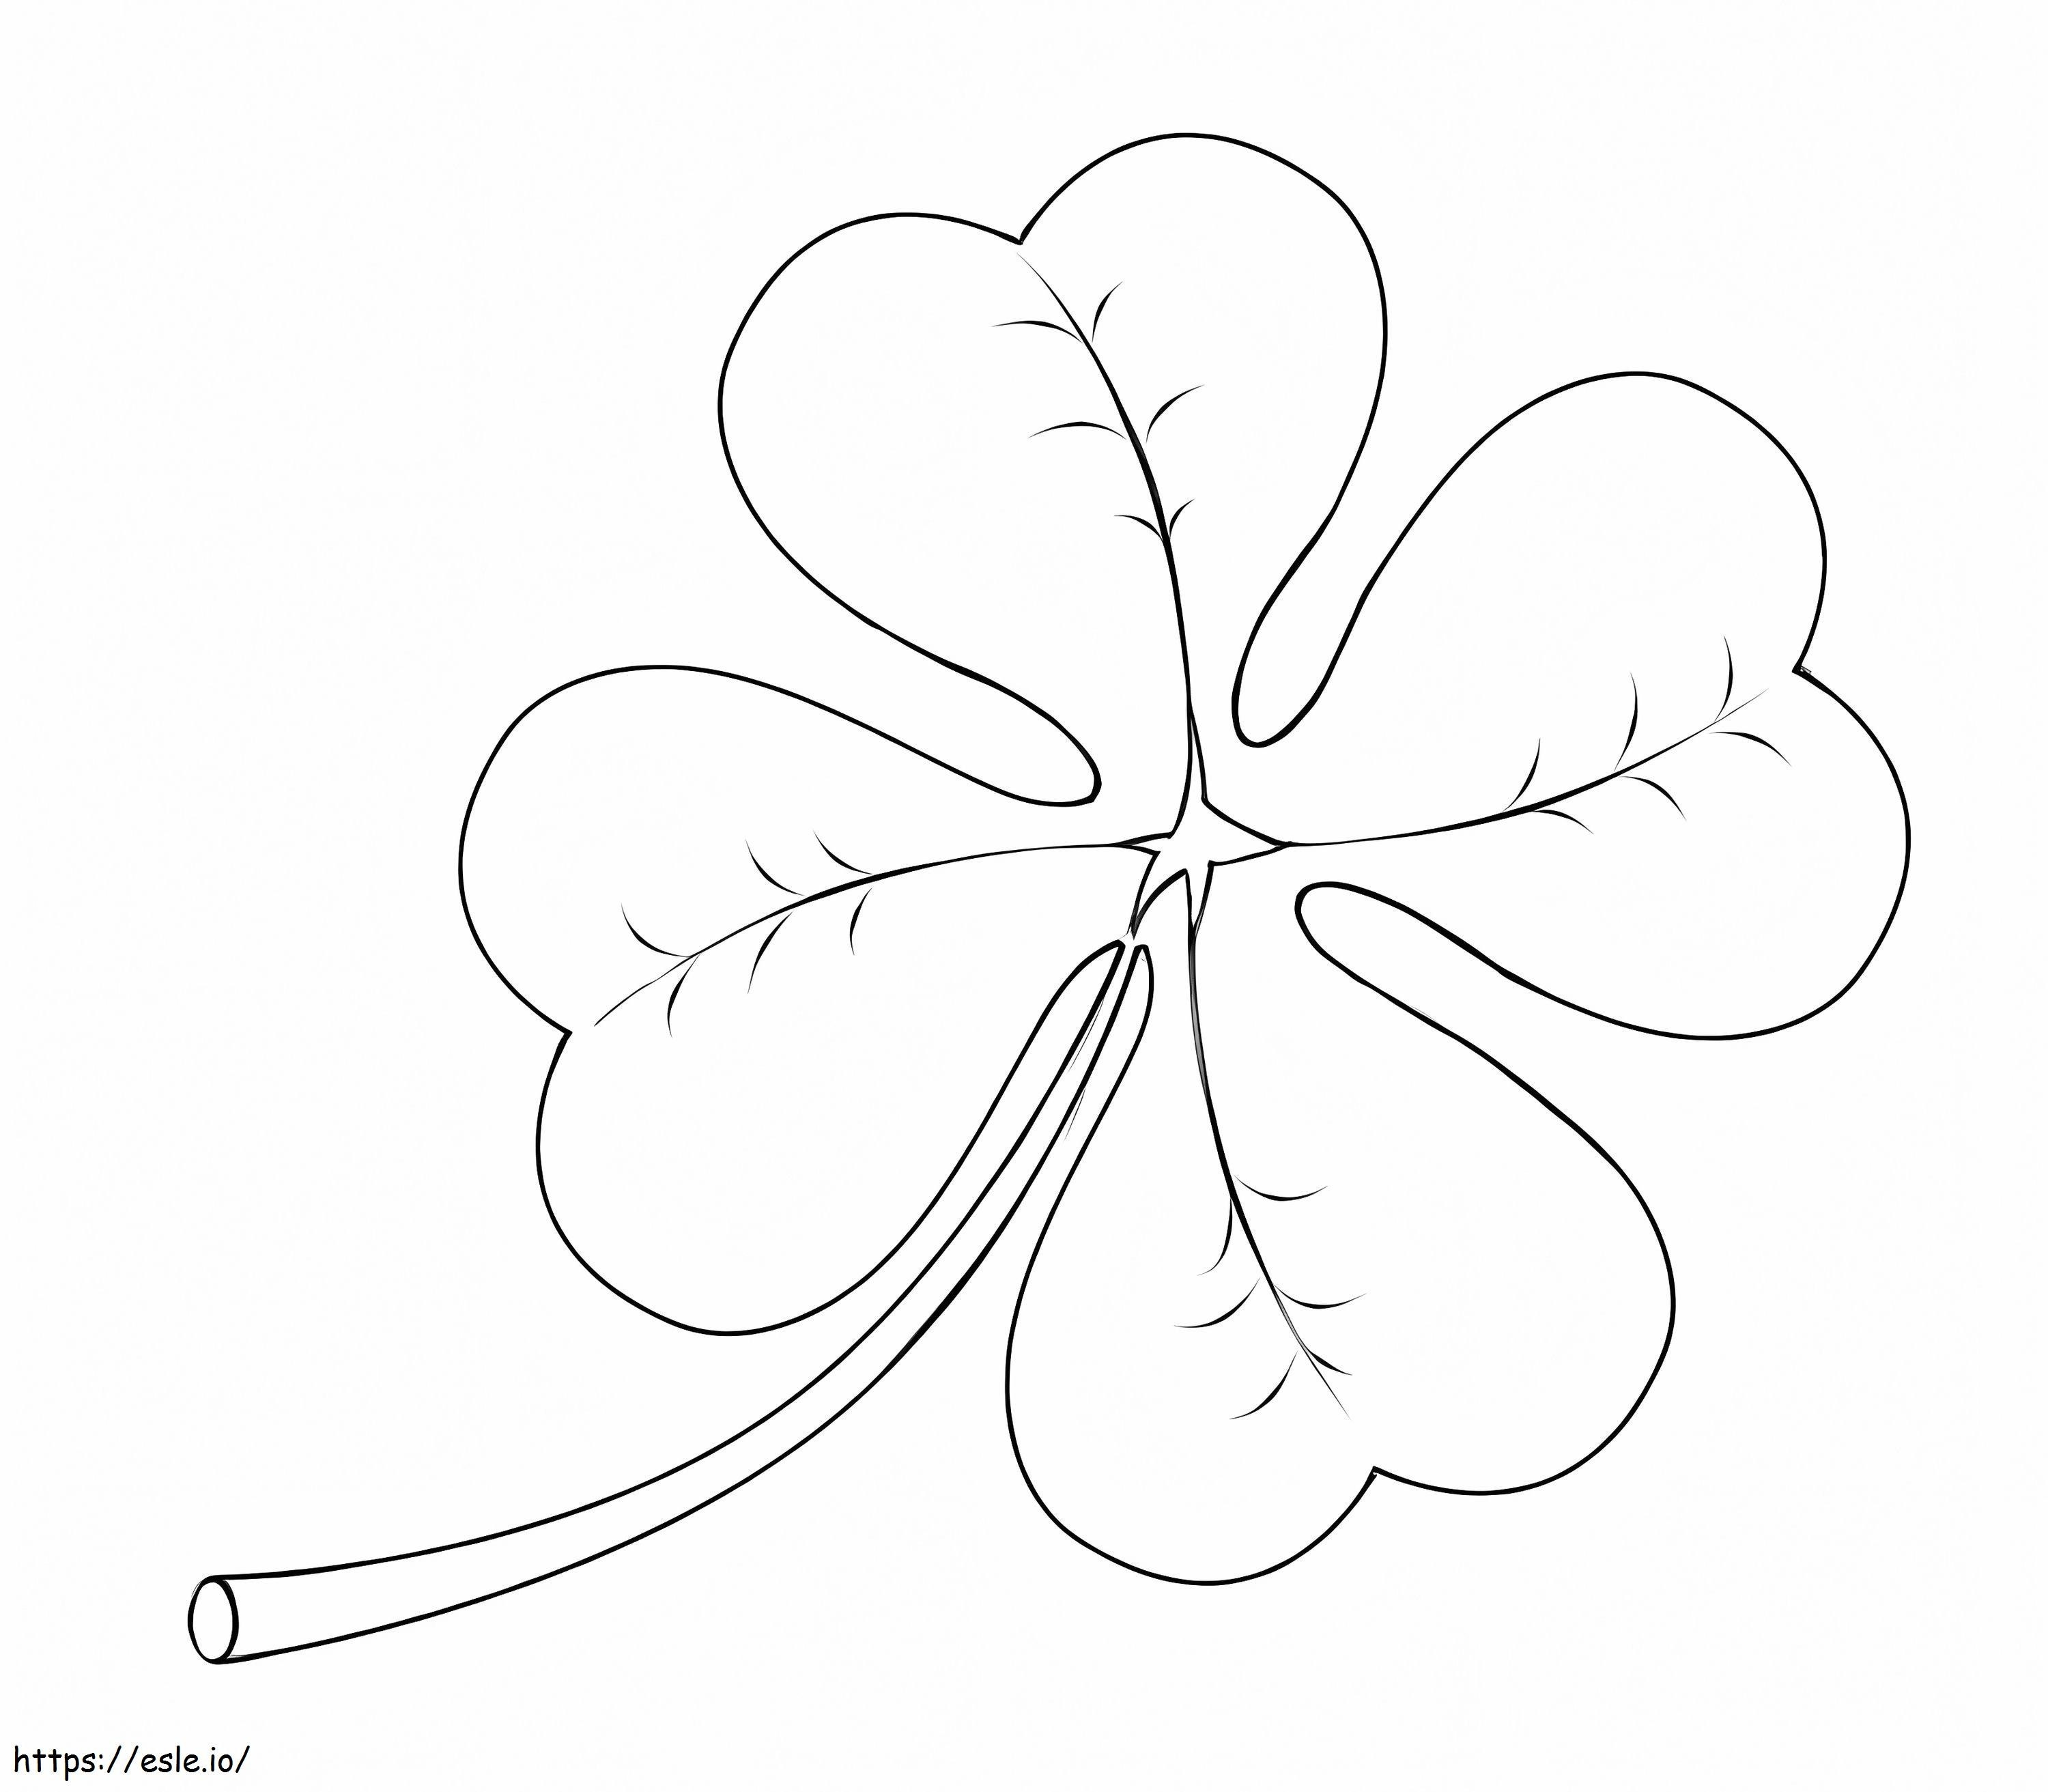 Four Leaf Clover 12 coloring page